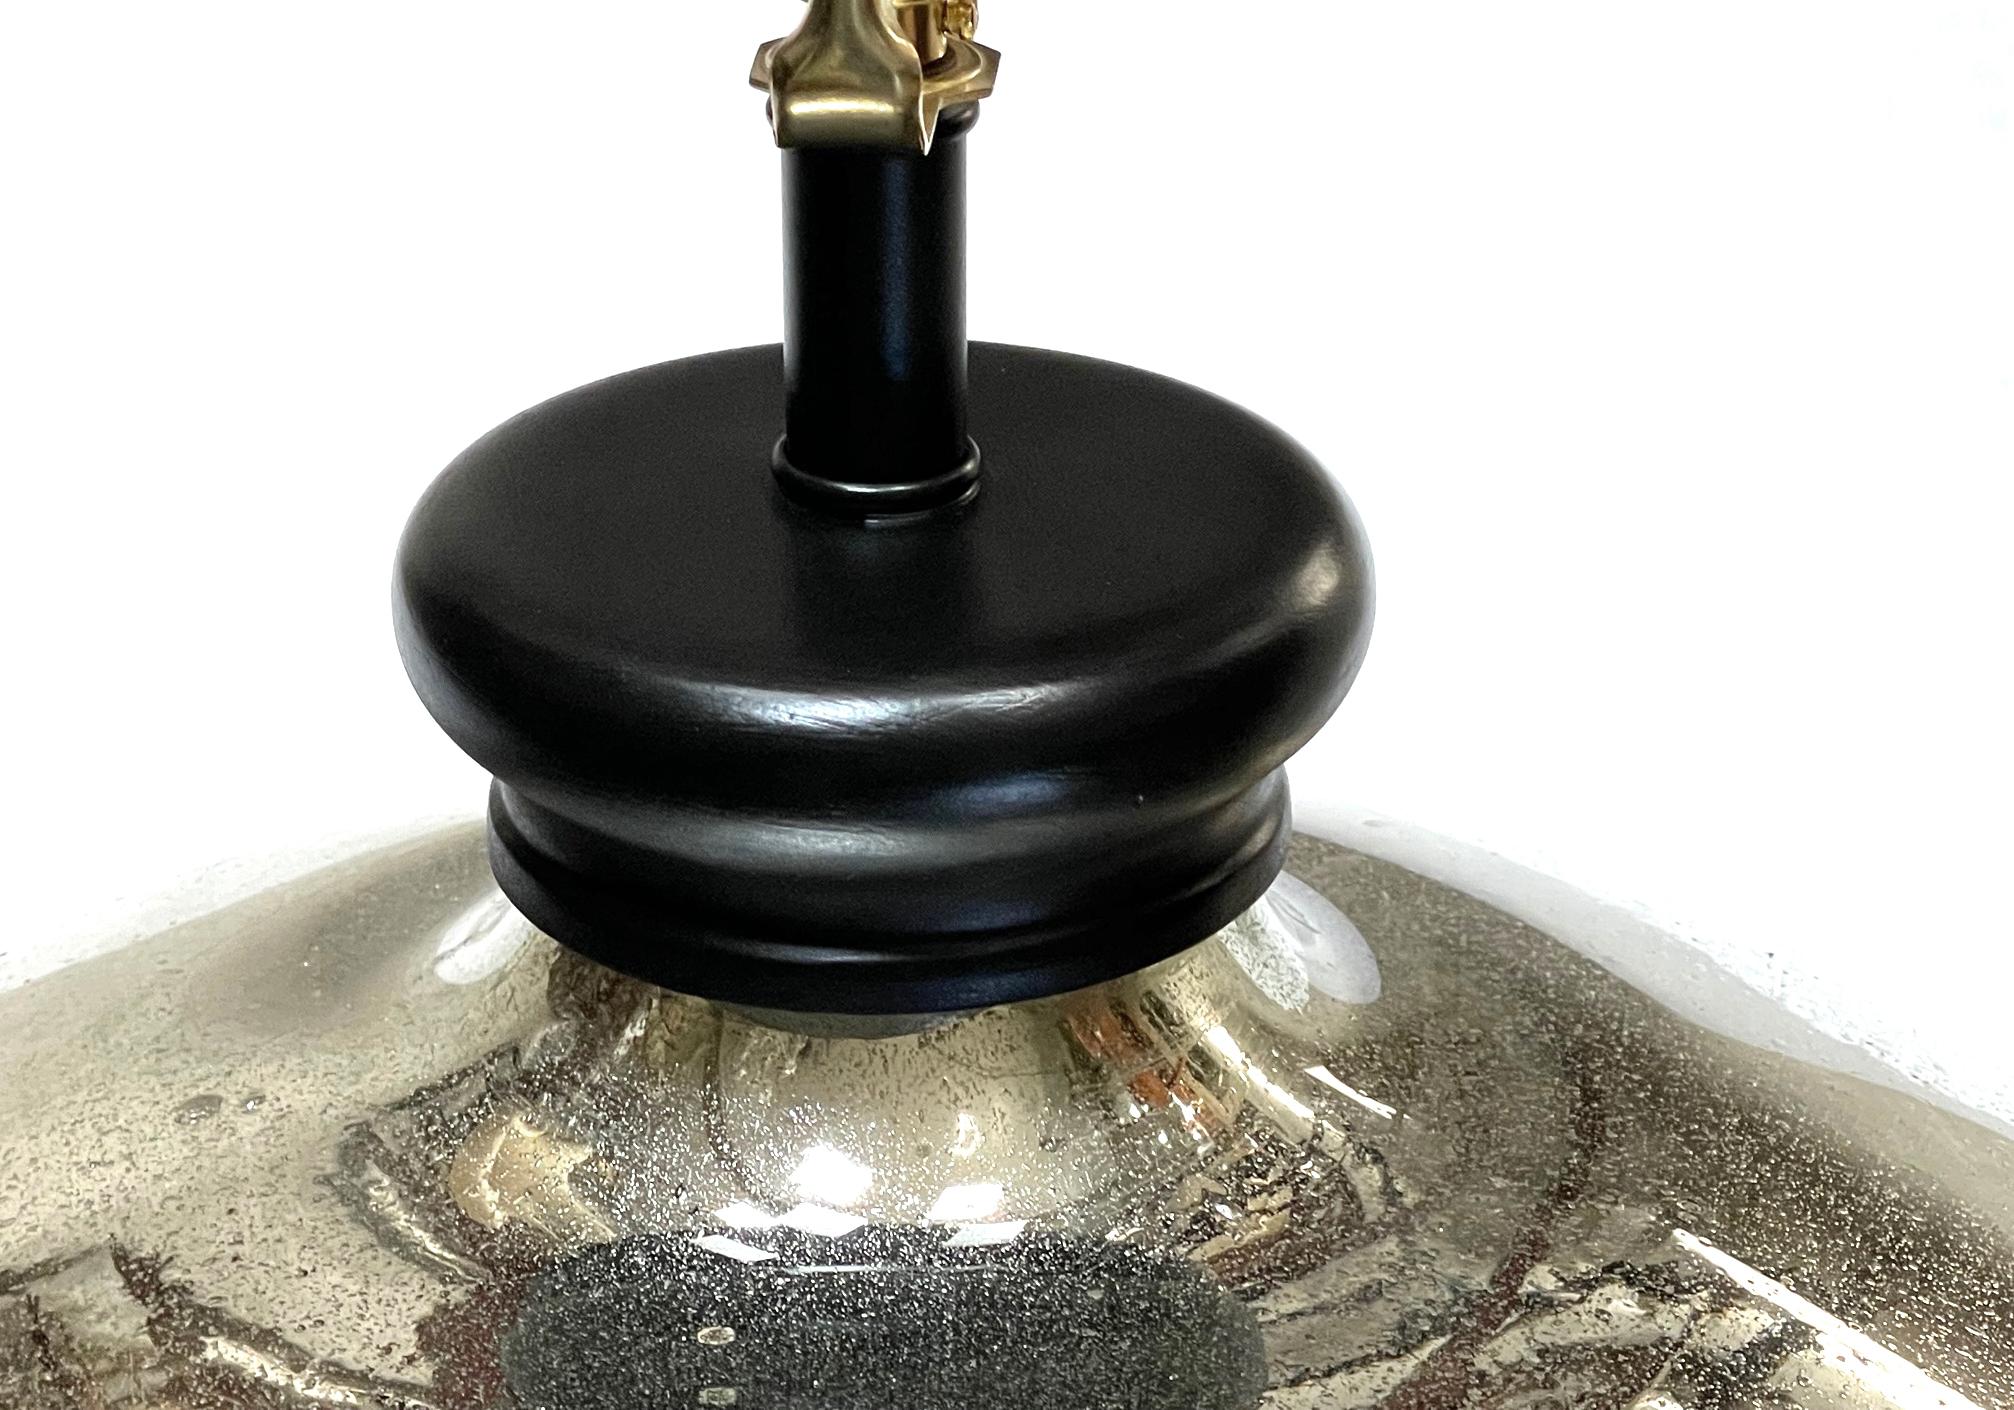 of impressive scale, the orb-form lamp of mercury glass fitted with an ebonized wooden cap and base